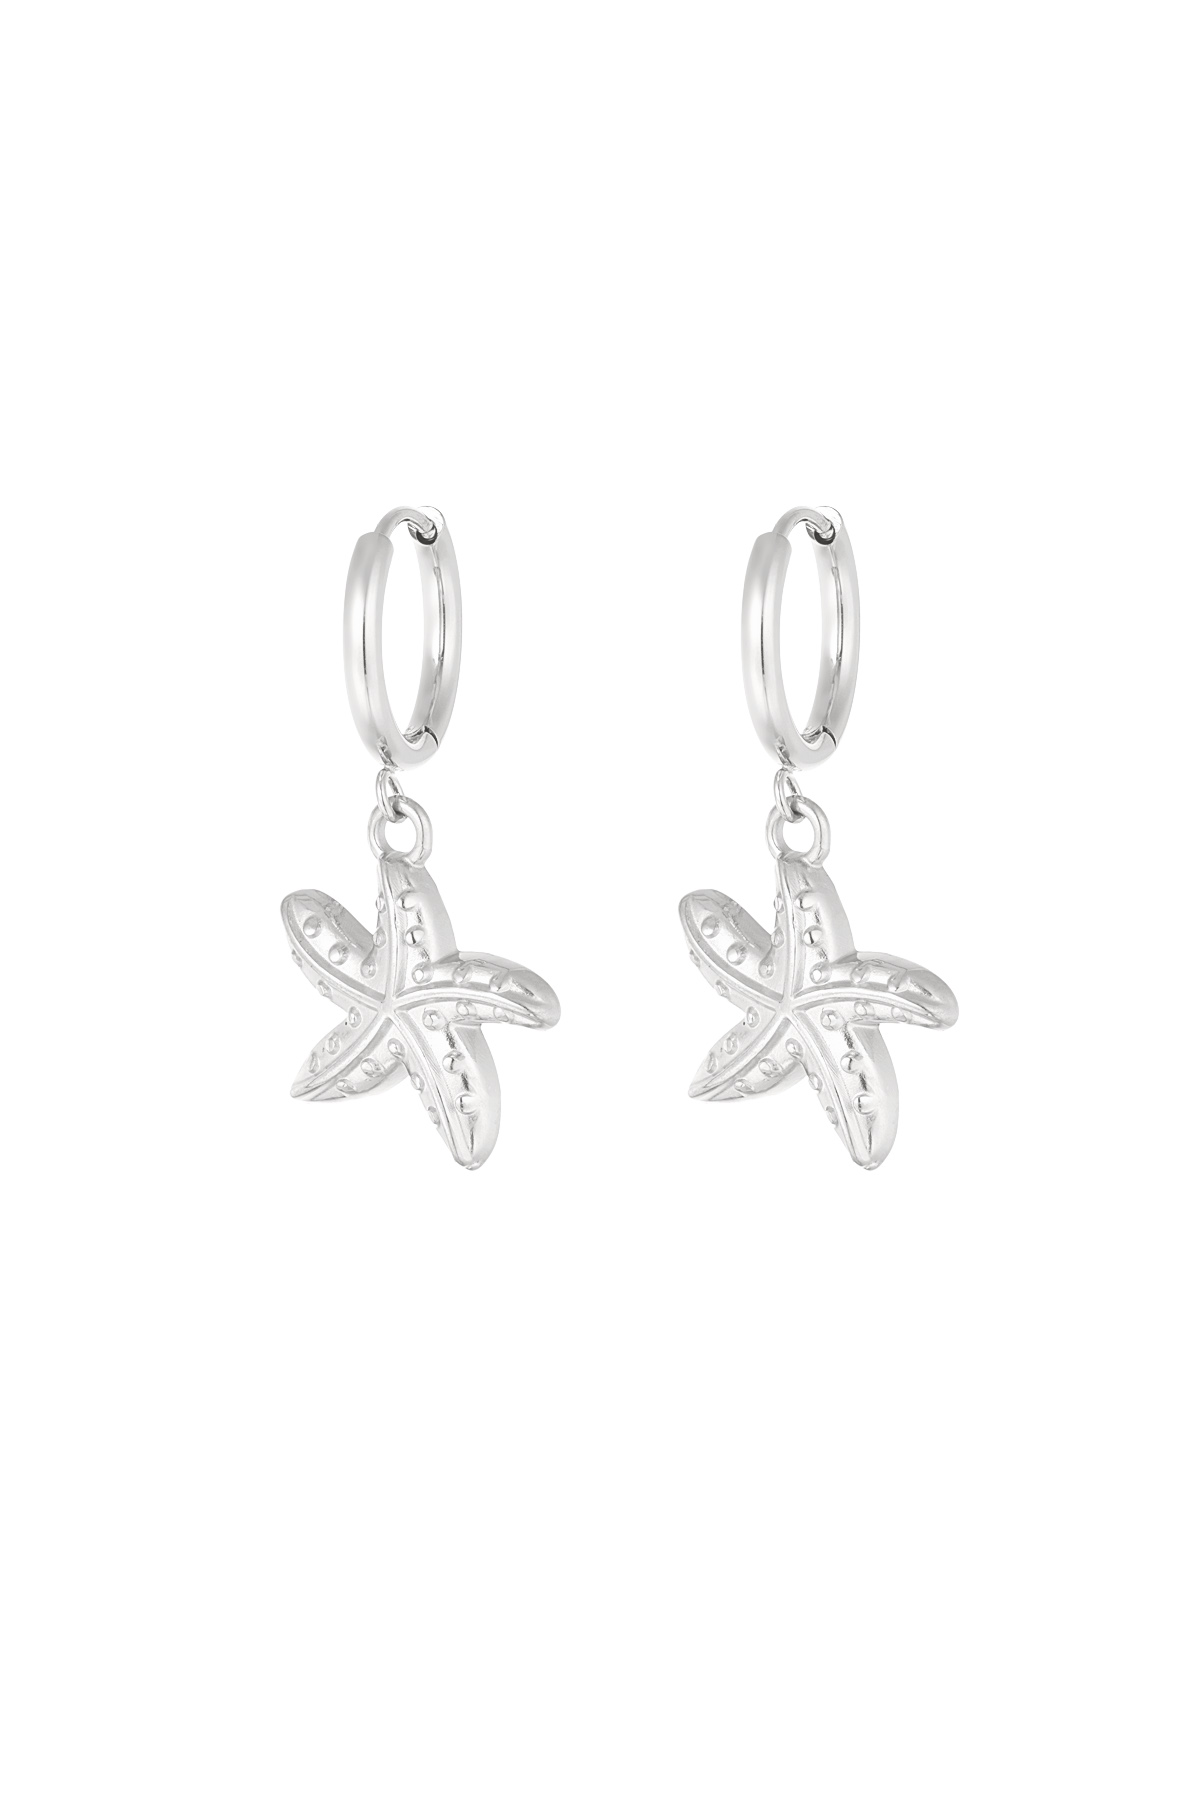 Earrings special starfish - silver h5 